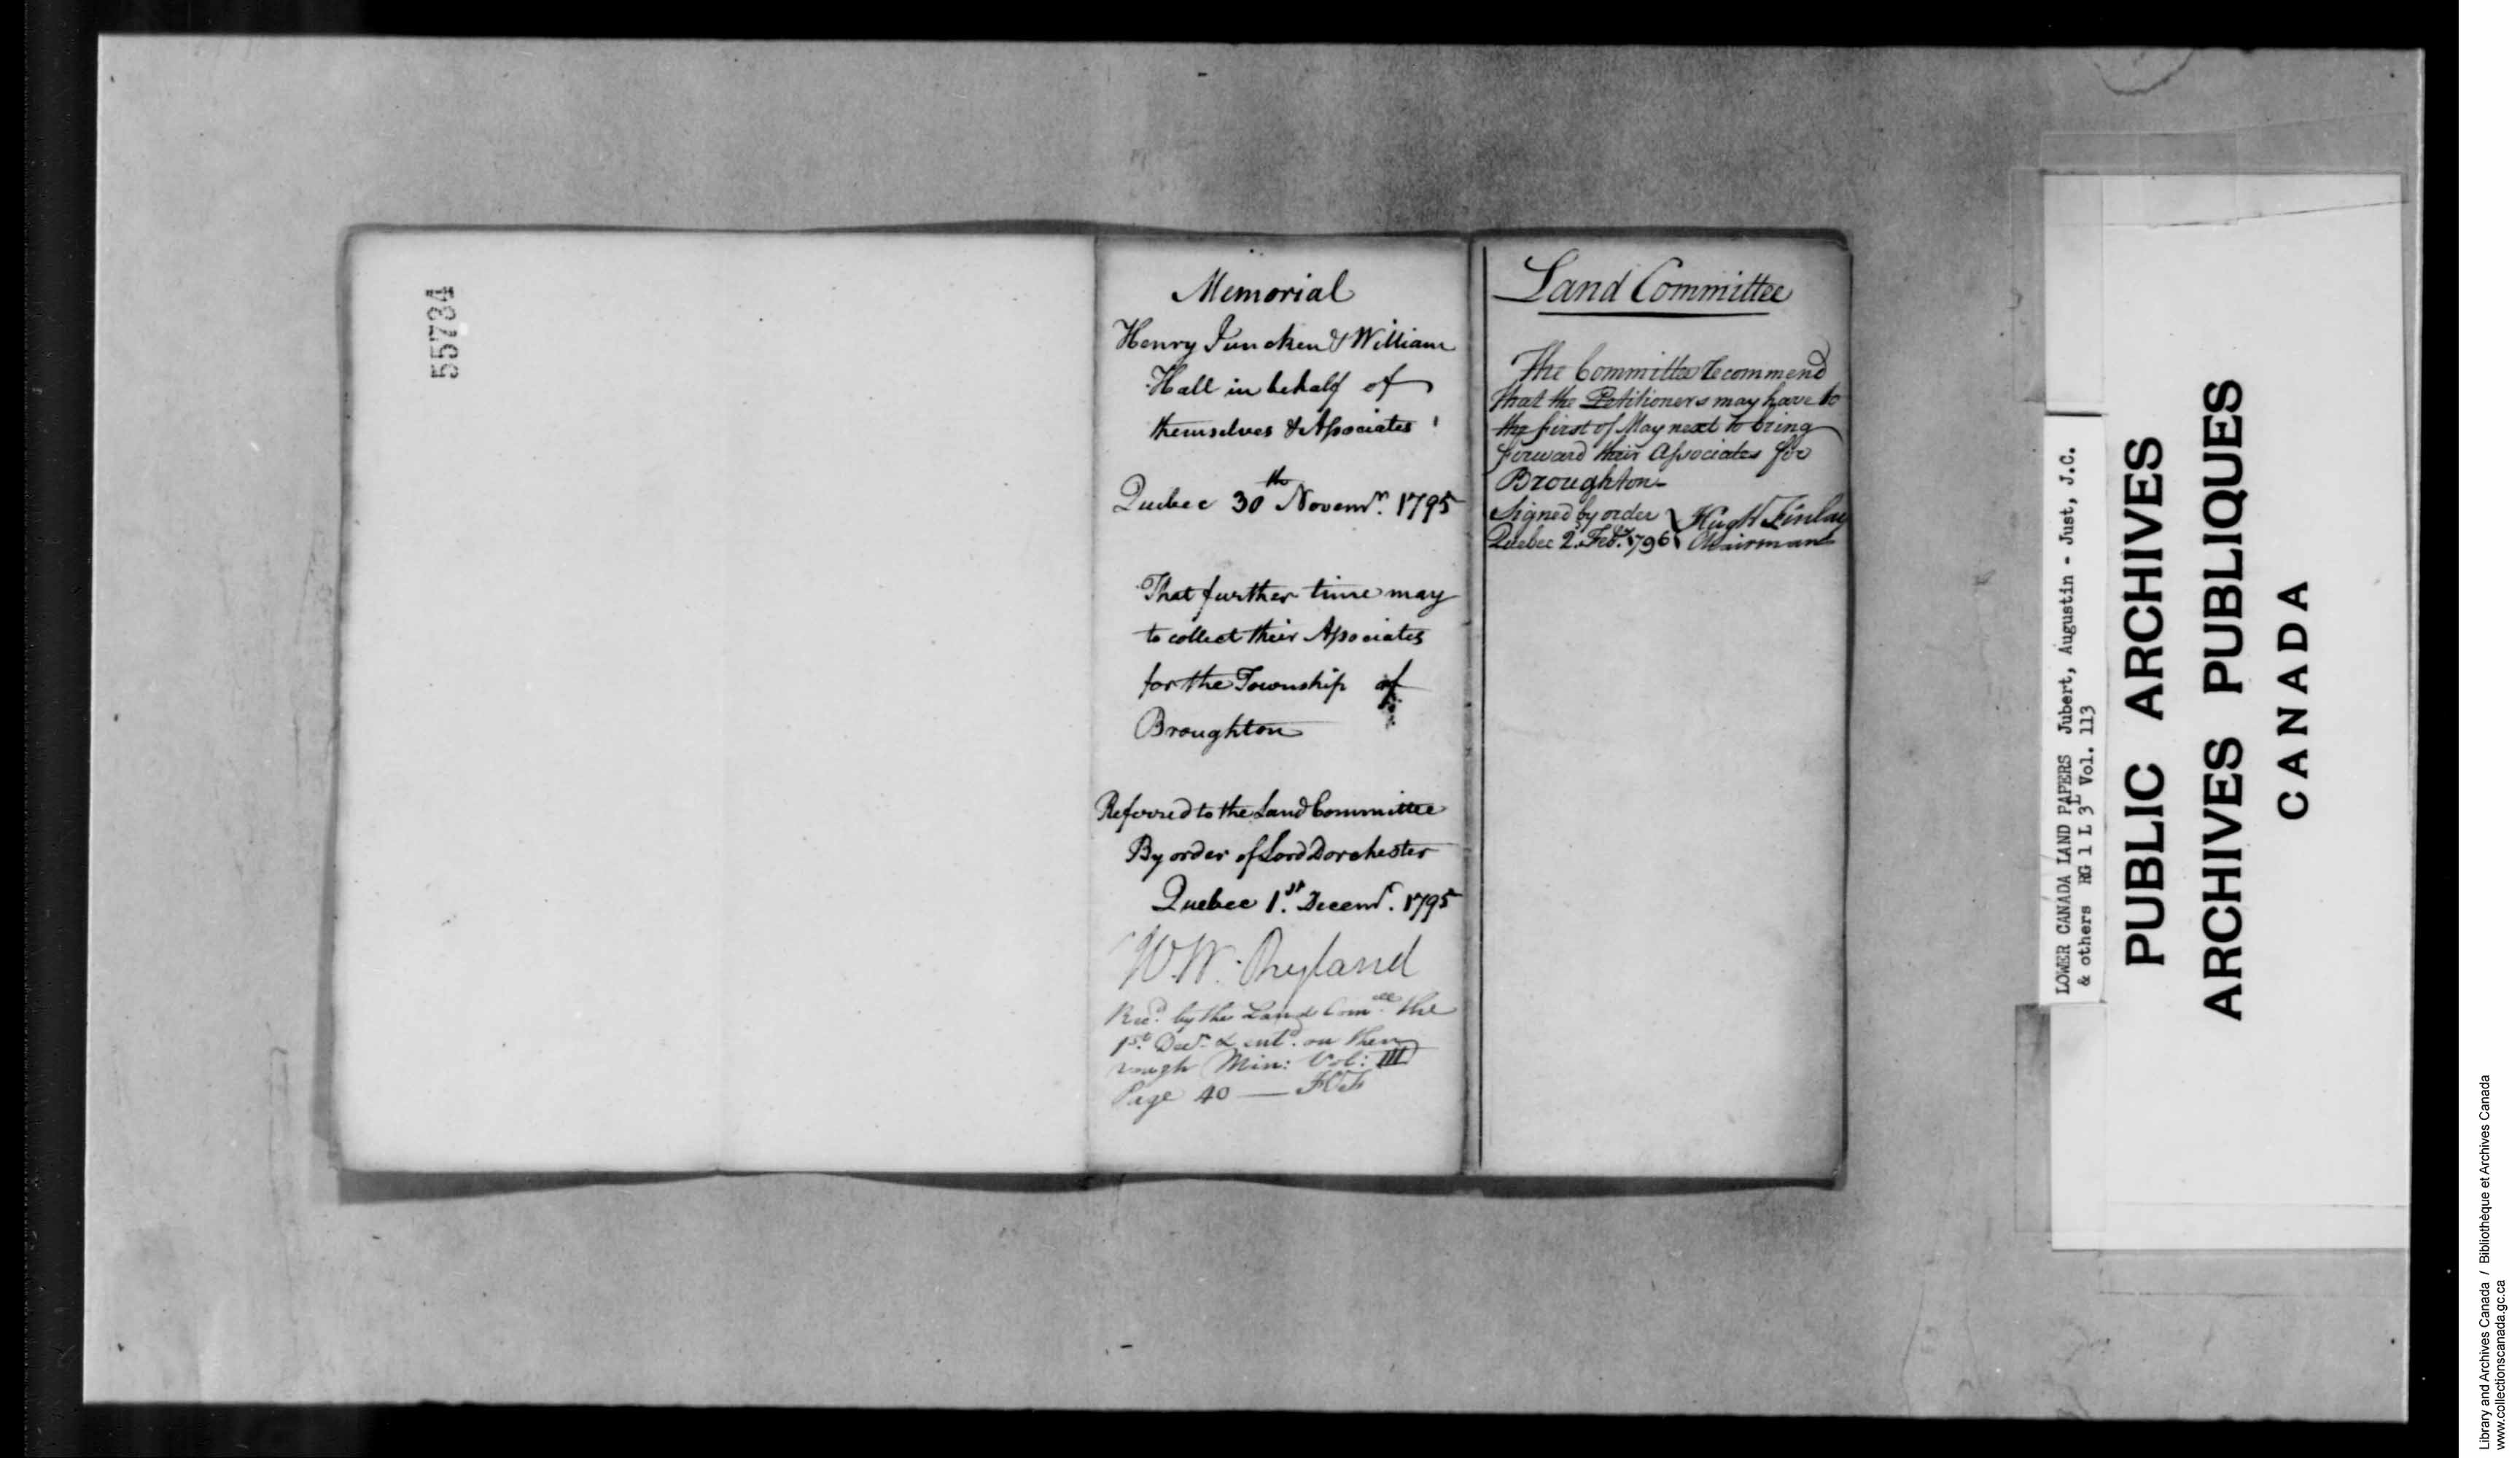 Digitized page of  for Image No.: e008700222